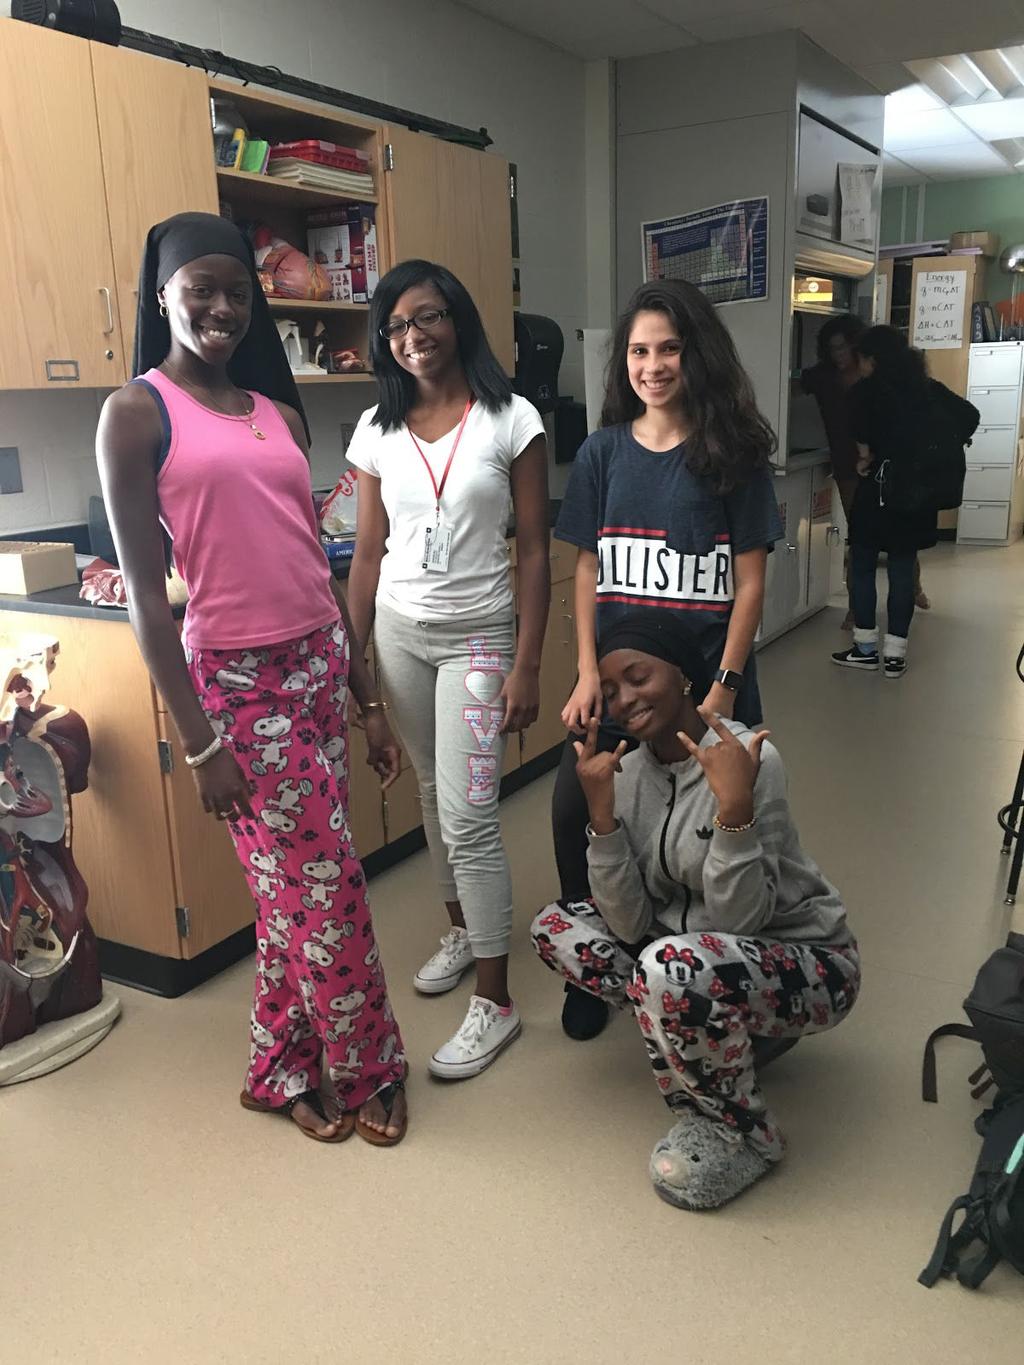 Kadidjatou, De'Shyra, Chastity, and Fatou (all 2019) On September 20, 2017, the class of 2018 had a paint war; it was organized